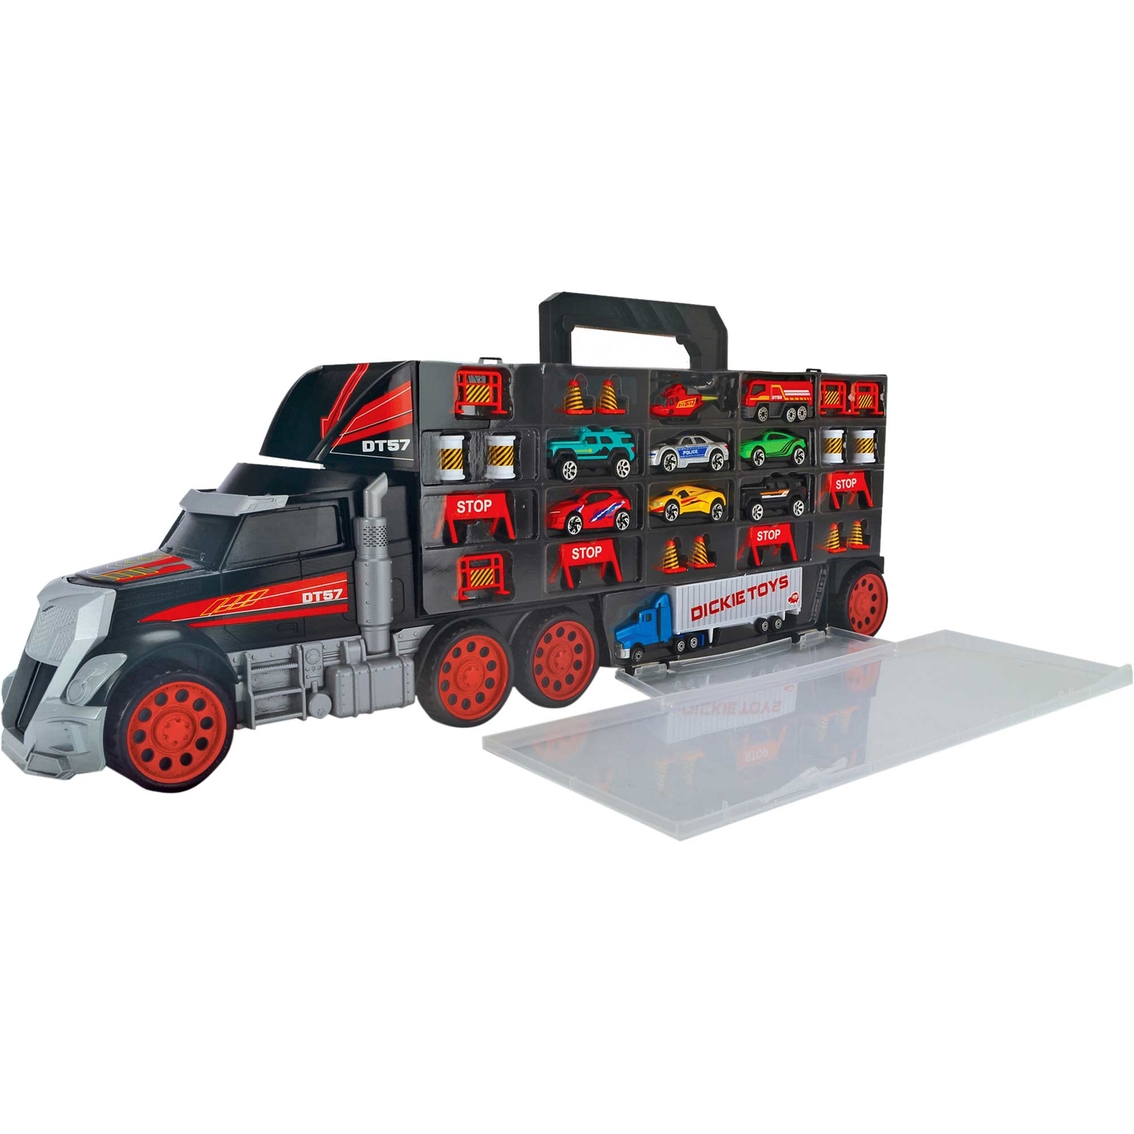 Dickie Toys Truck Carry Case Playset - Image 2 of 2